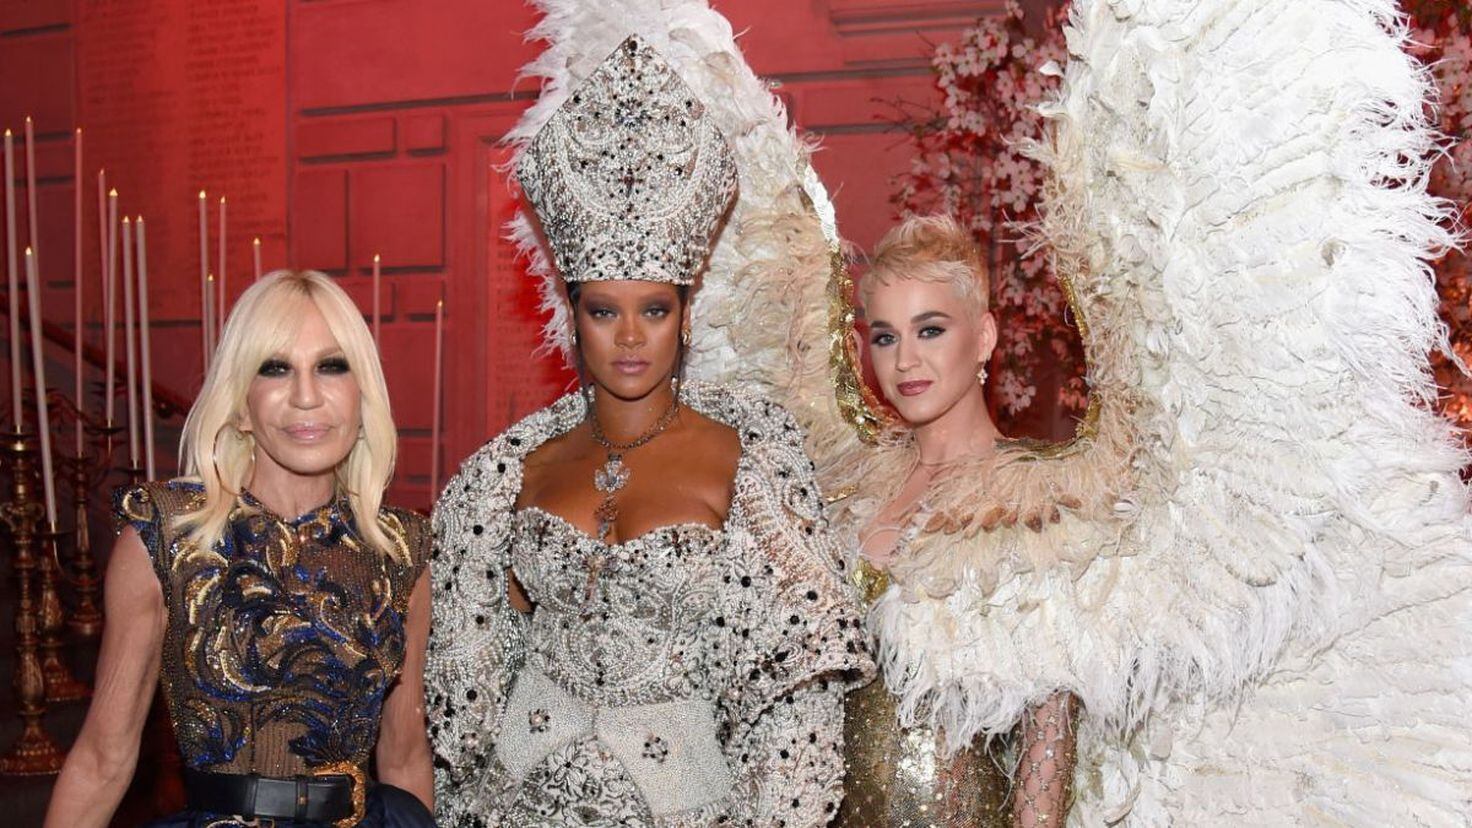 Met Gala's Controversial Moments in Its History: Photos